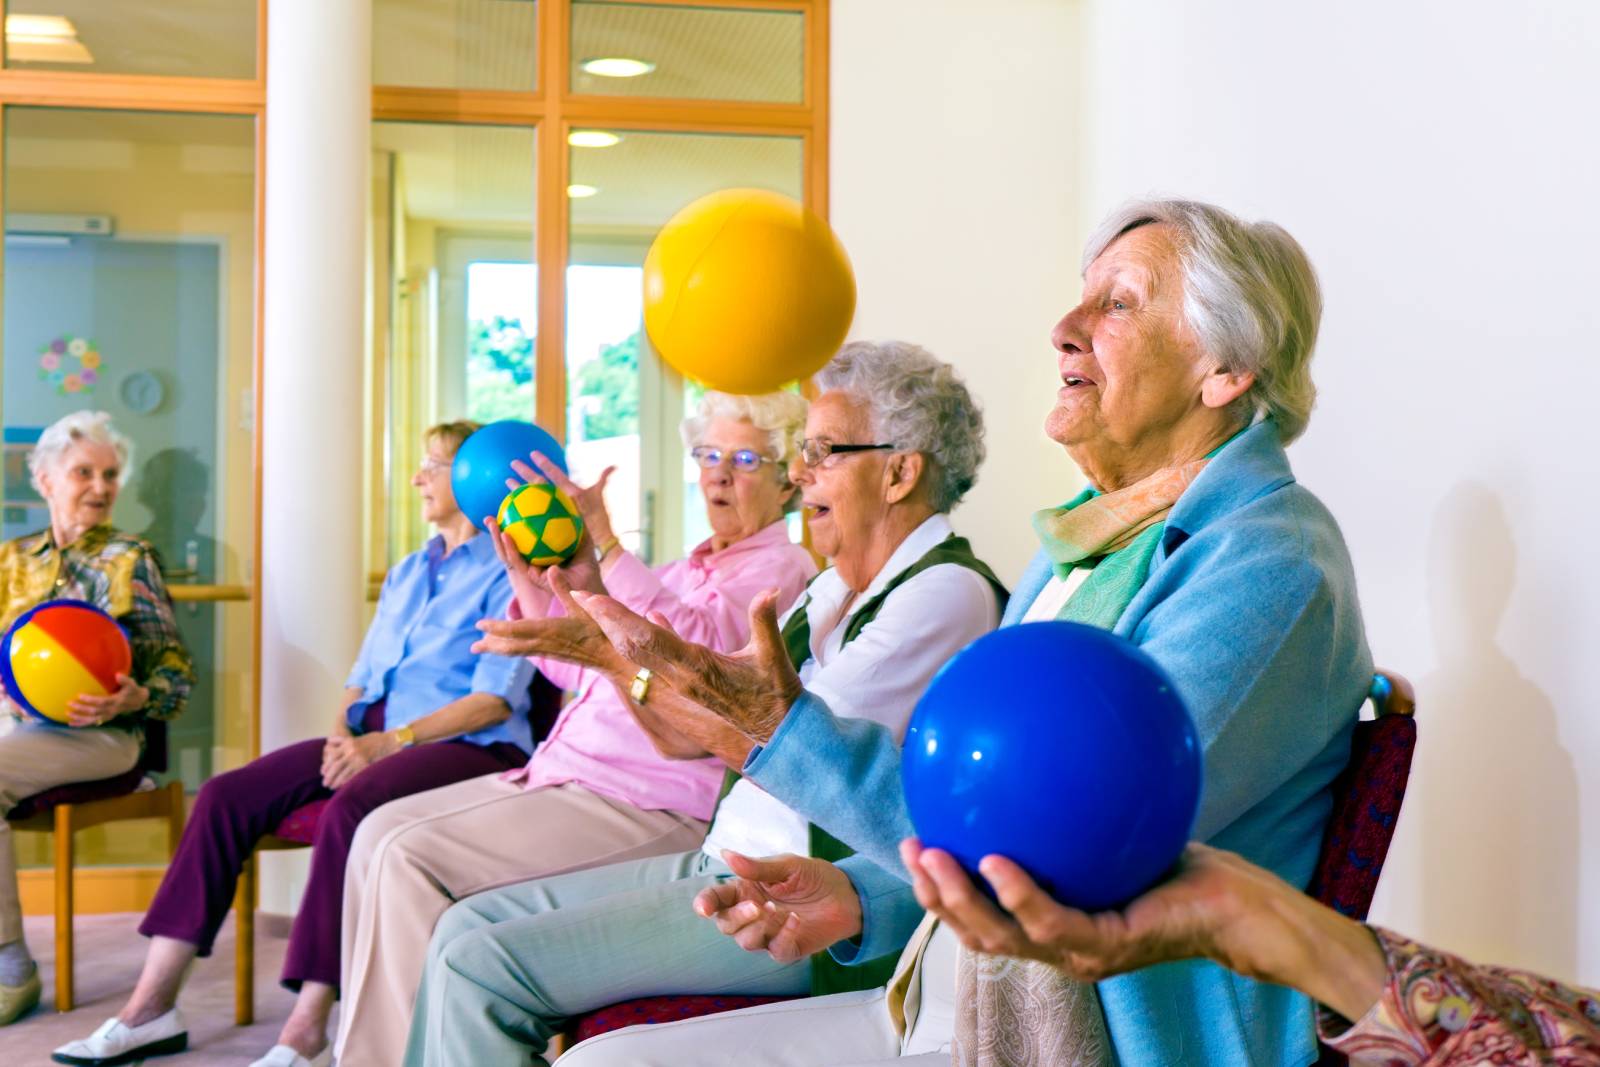 Senior women with dementia all holding a ball.